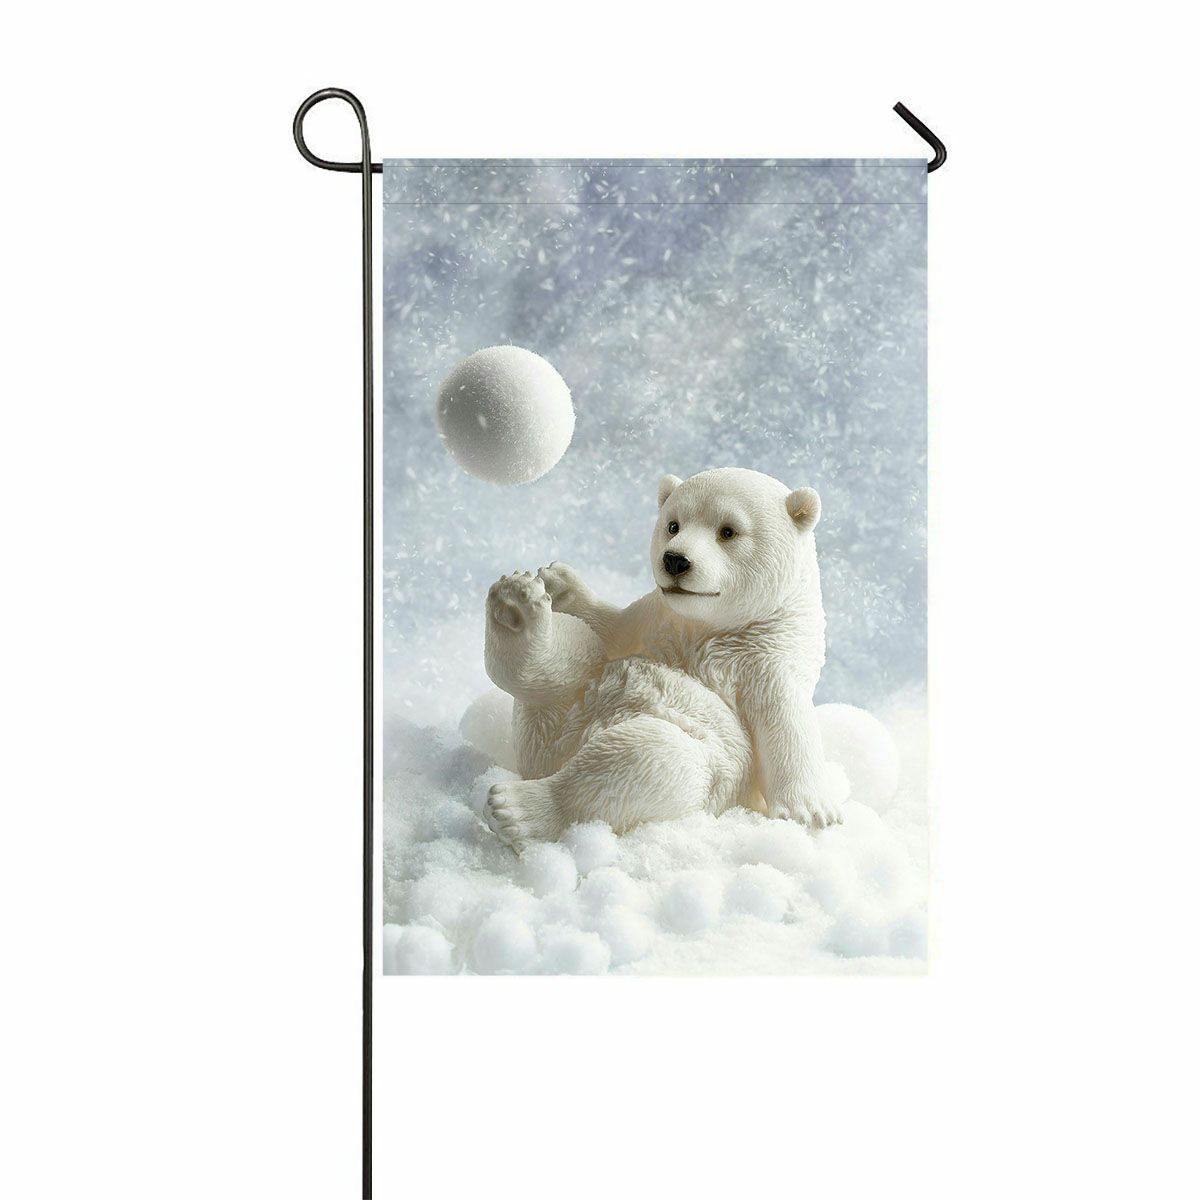 ABPHQTO Polar Bear Winter Playing Snowball Home Outdoor Garden Flag House Banner Size 12x18 Inch - image 1 of 1